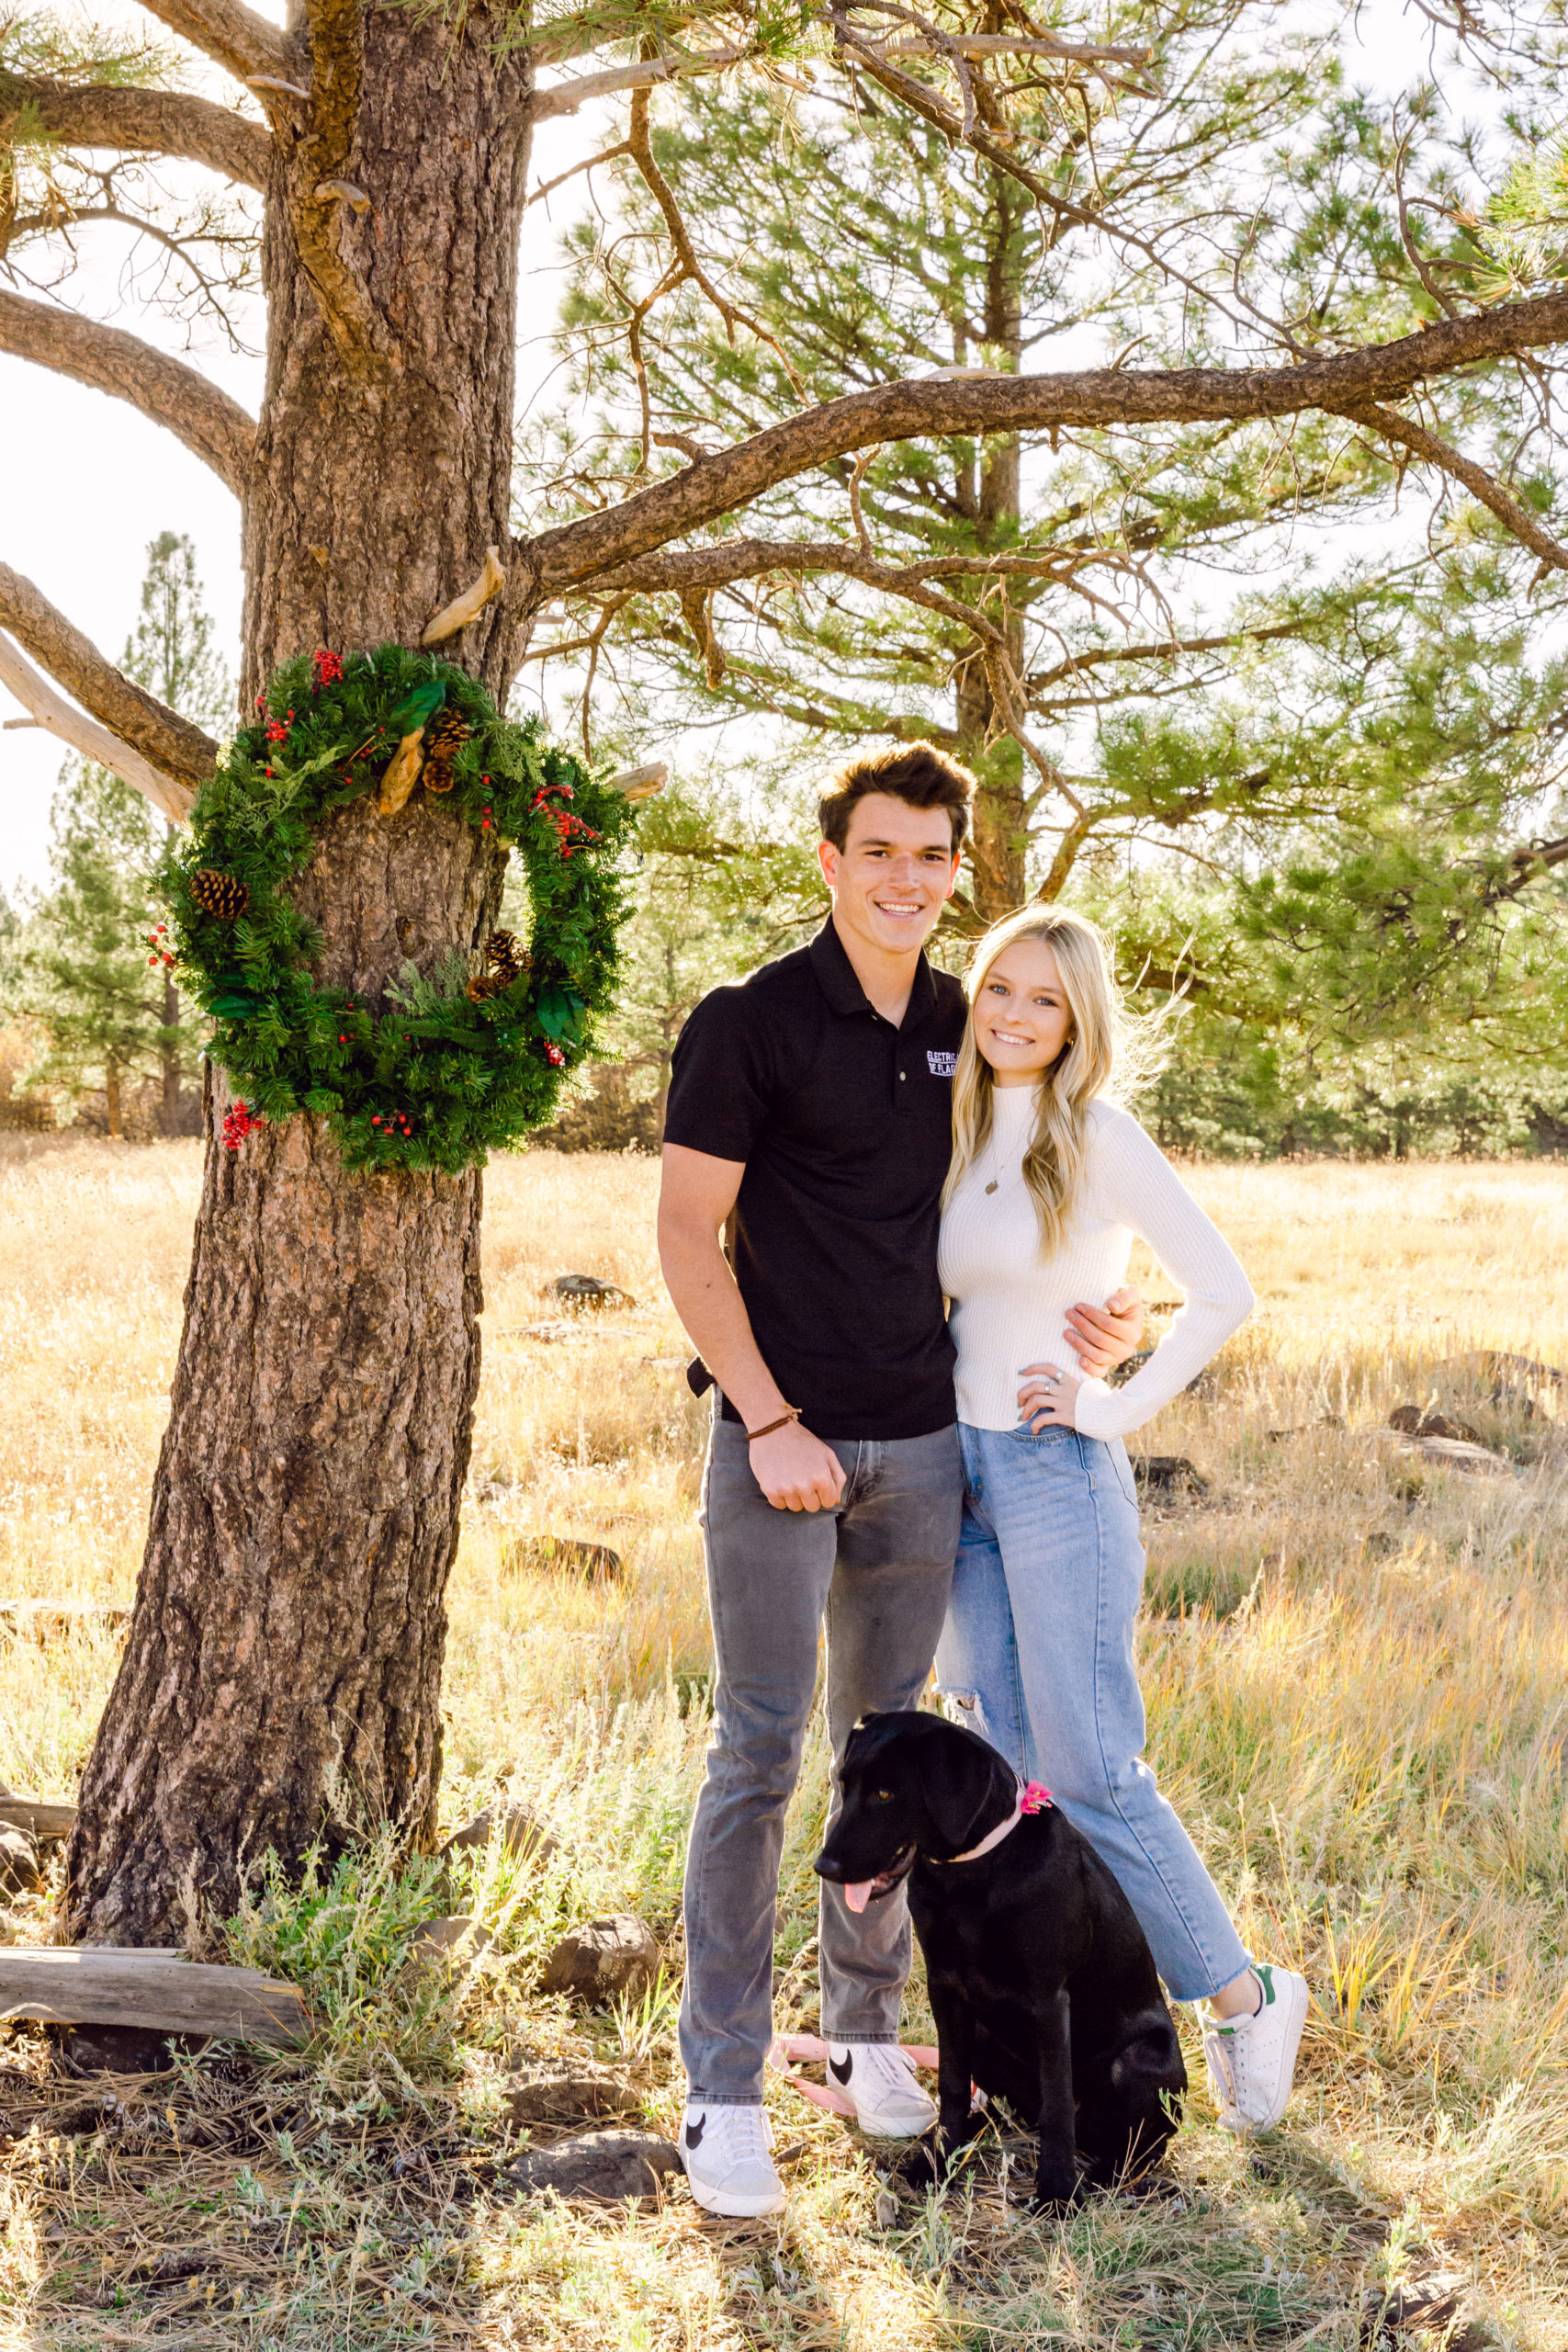 Luke, Kirstin, and Corra get cozy in this cute couples Christ portrait session at the park.